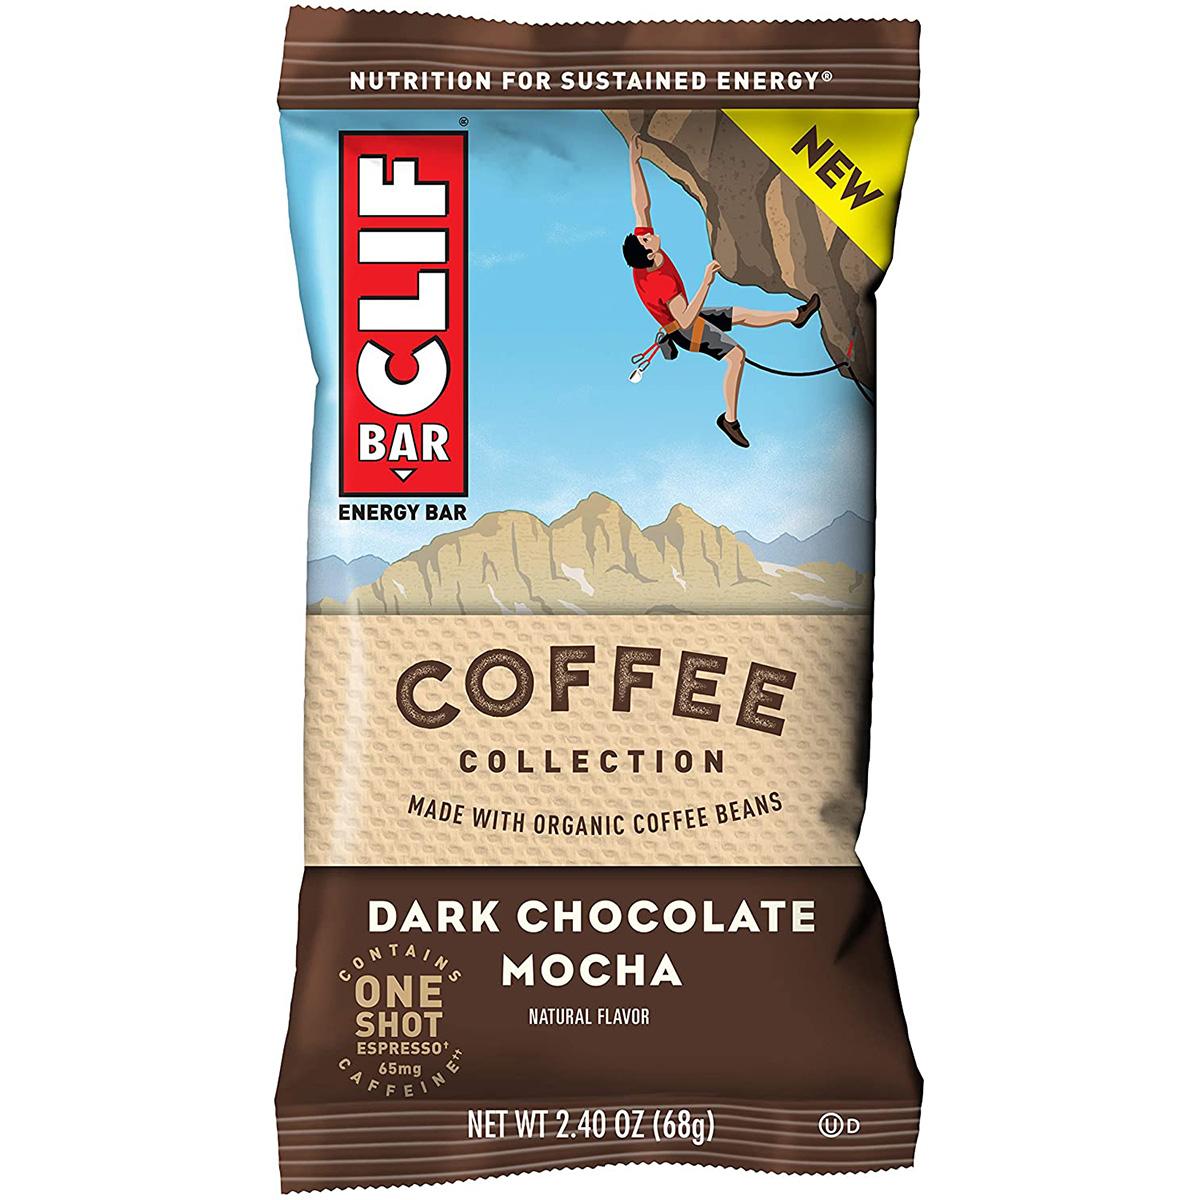 12 CLIF Energy Bars with 1 Shot of Espresso for $7.58 Shipped